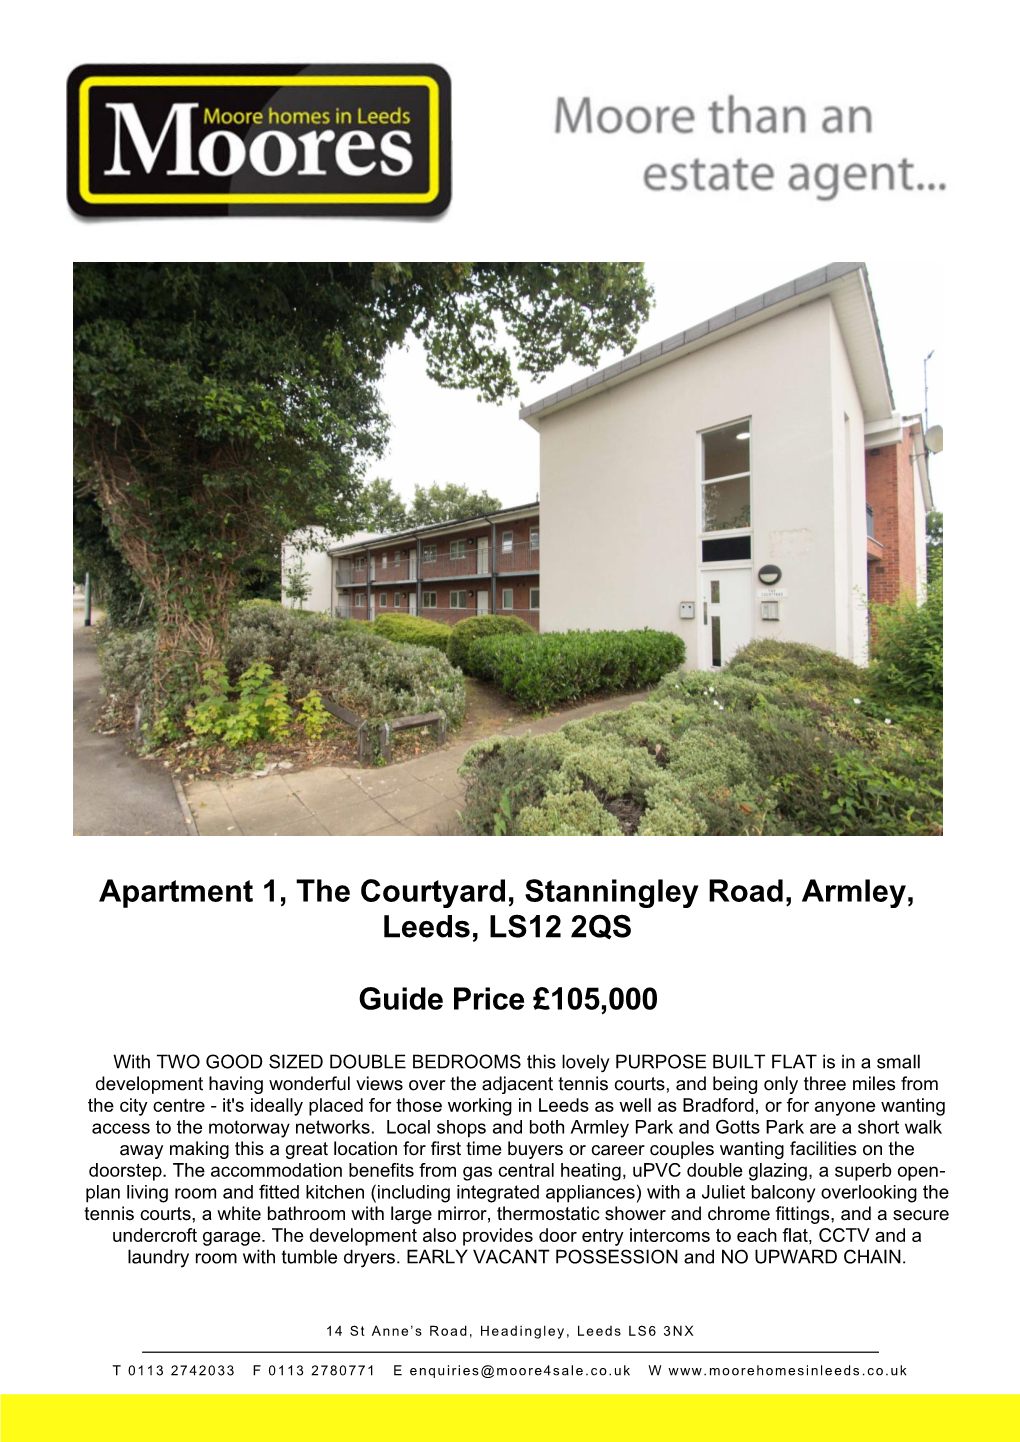 Apartment 1, the Courtyard, Stanningley Road, Armley, Leeds, LS12 2QS